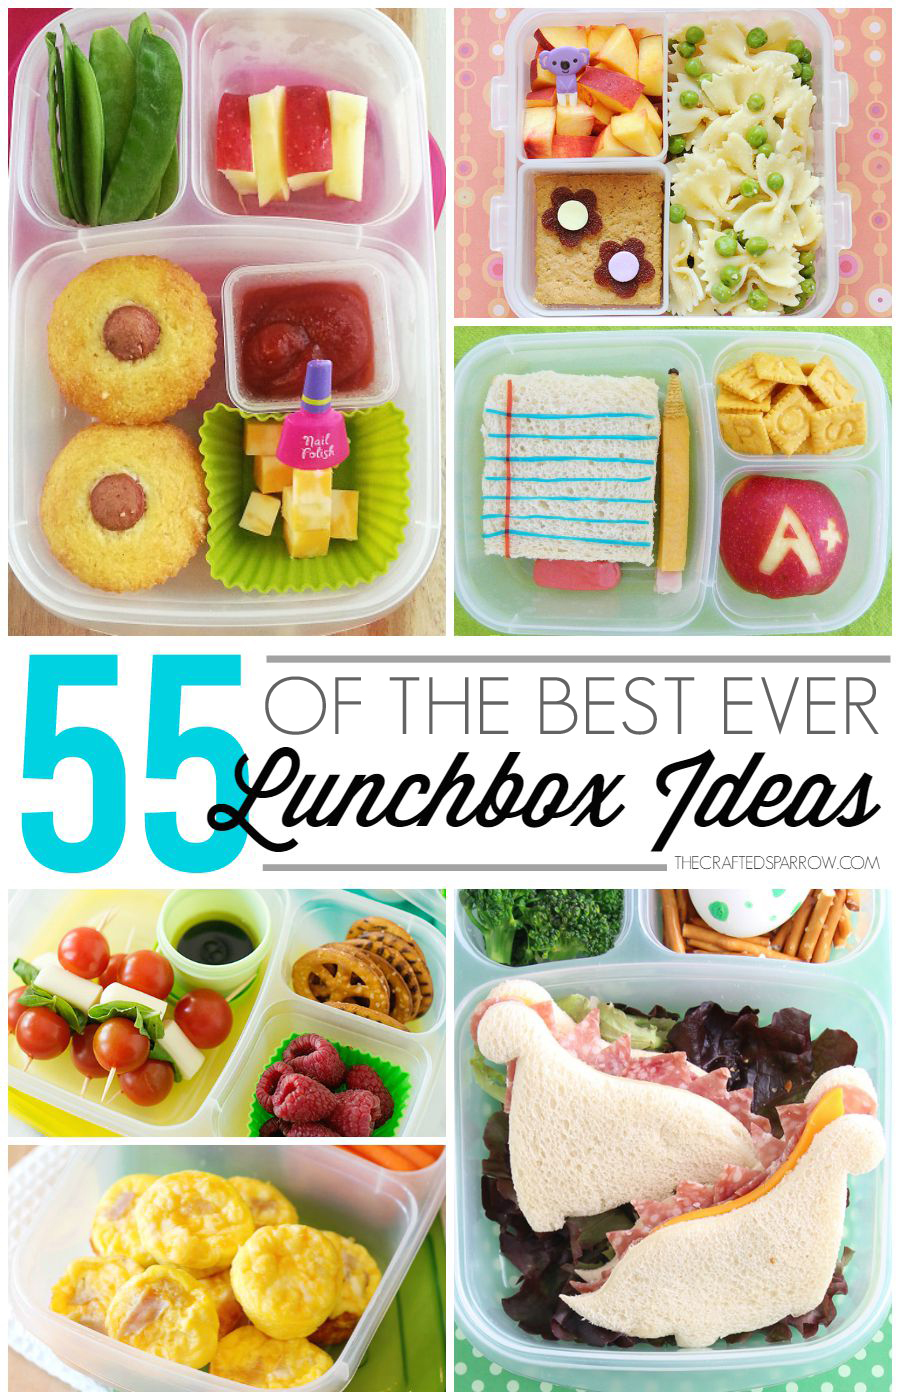 Lunch Ideas for Kids - The Best Ideas for Kids